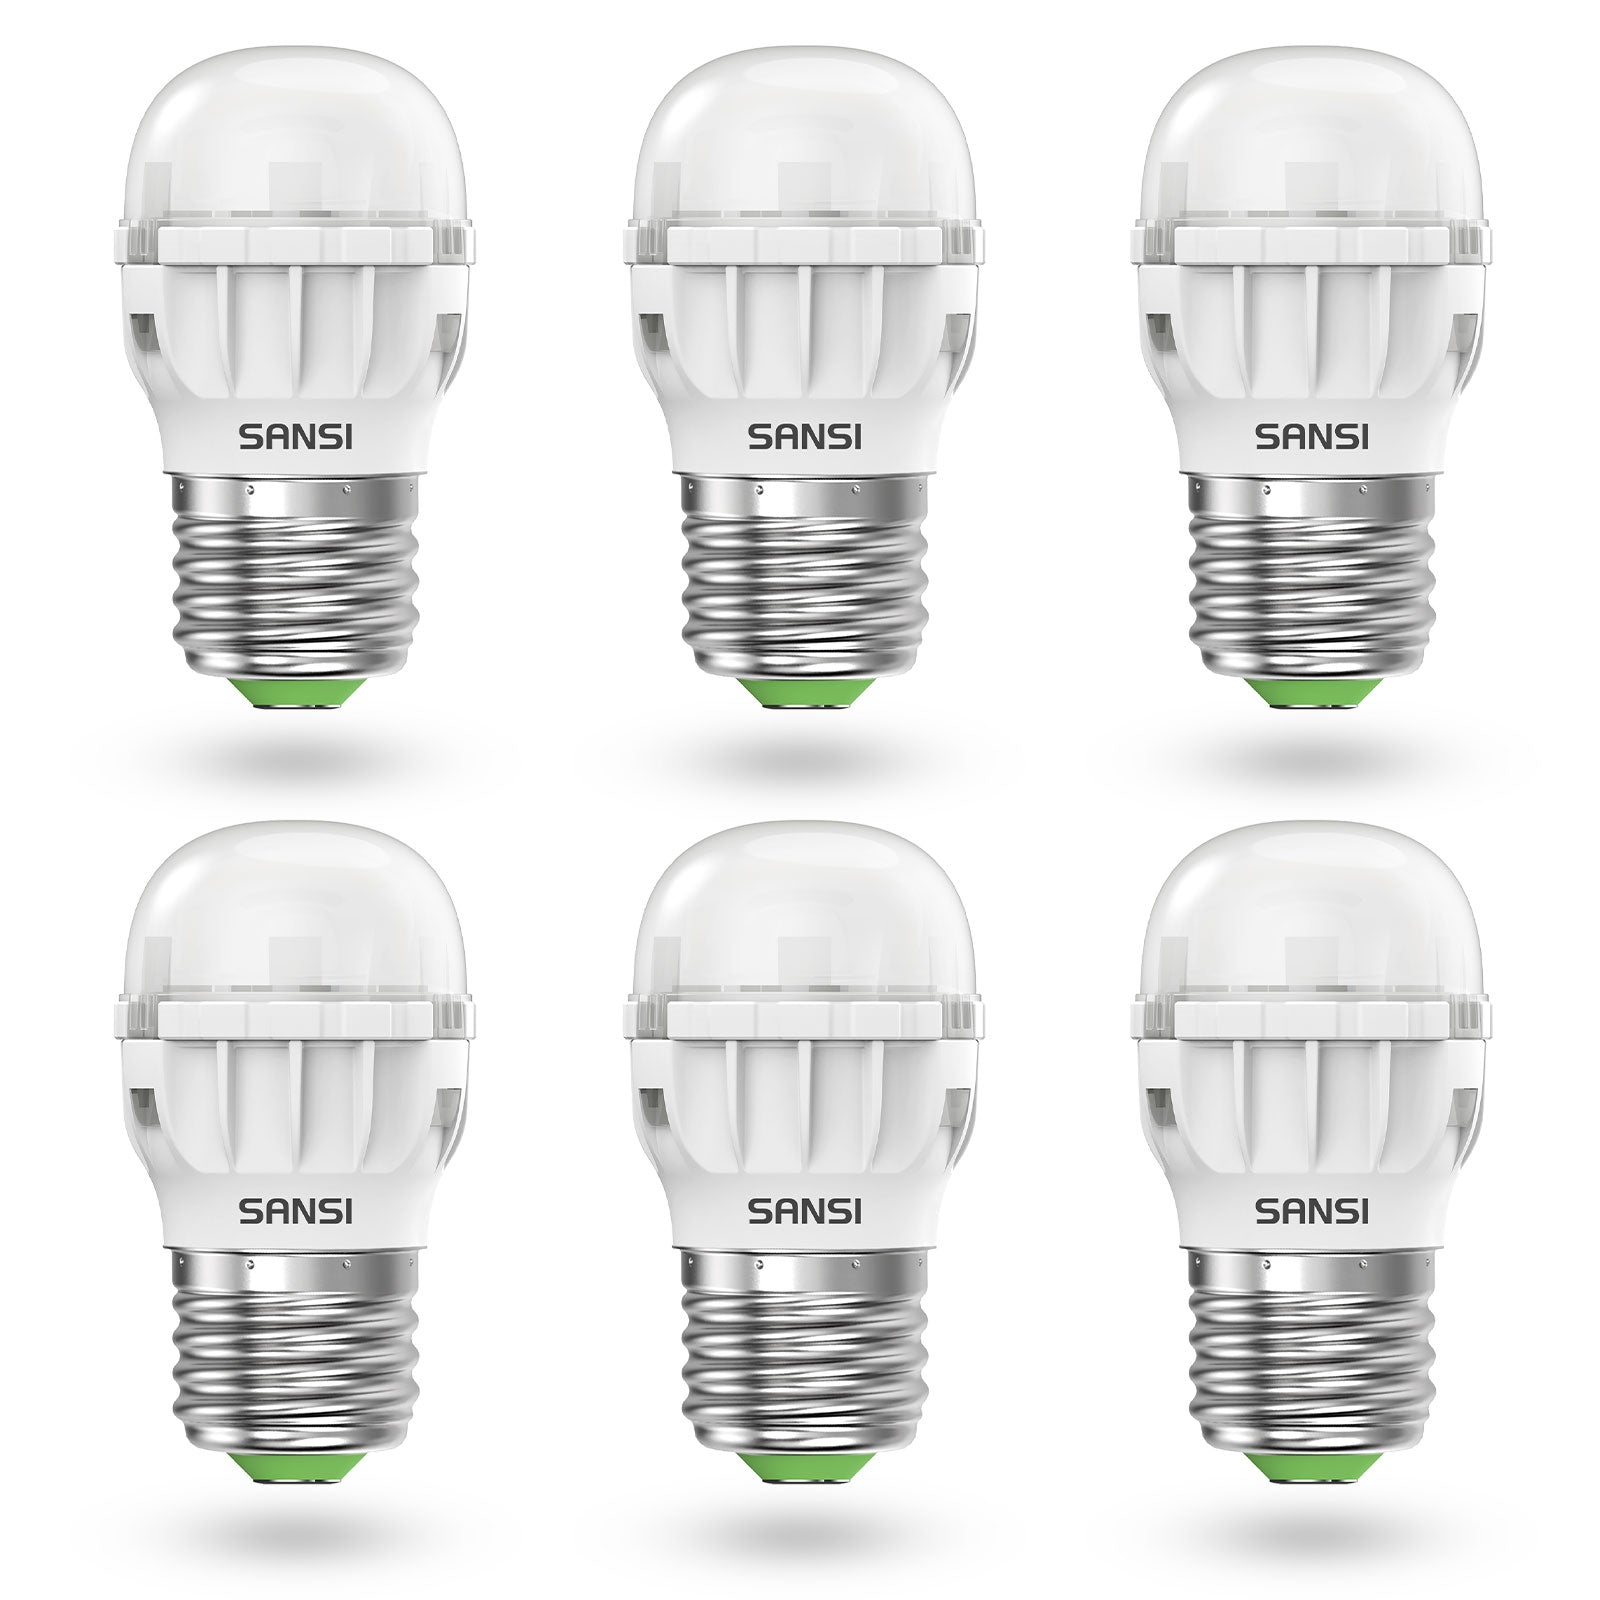 Bright and Efficient A11 7W LED Light Bulb for Your Home, 6 pack